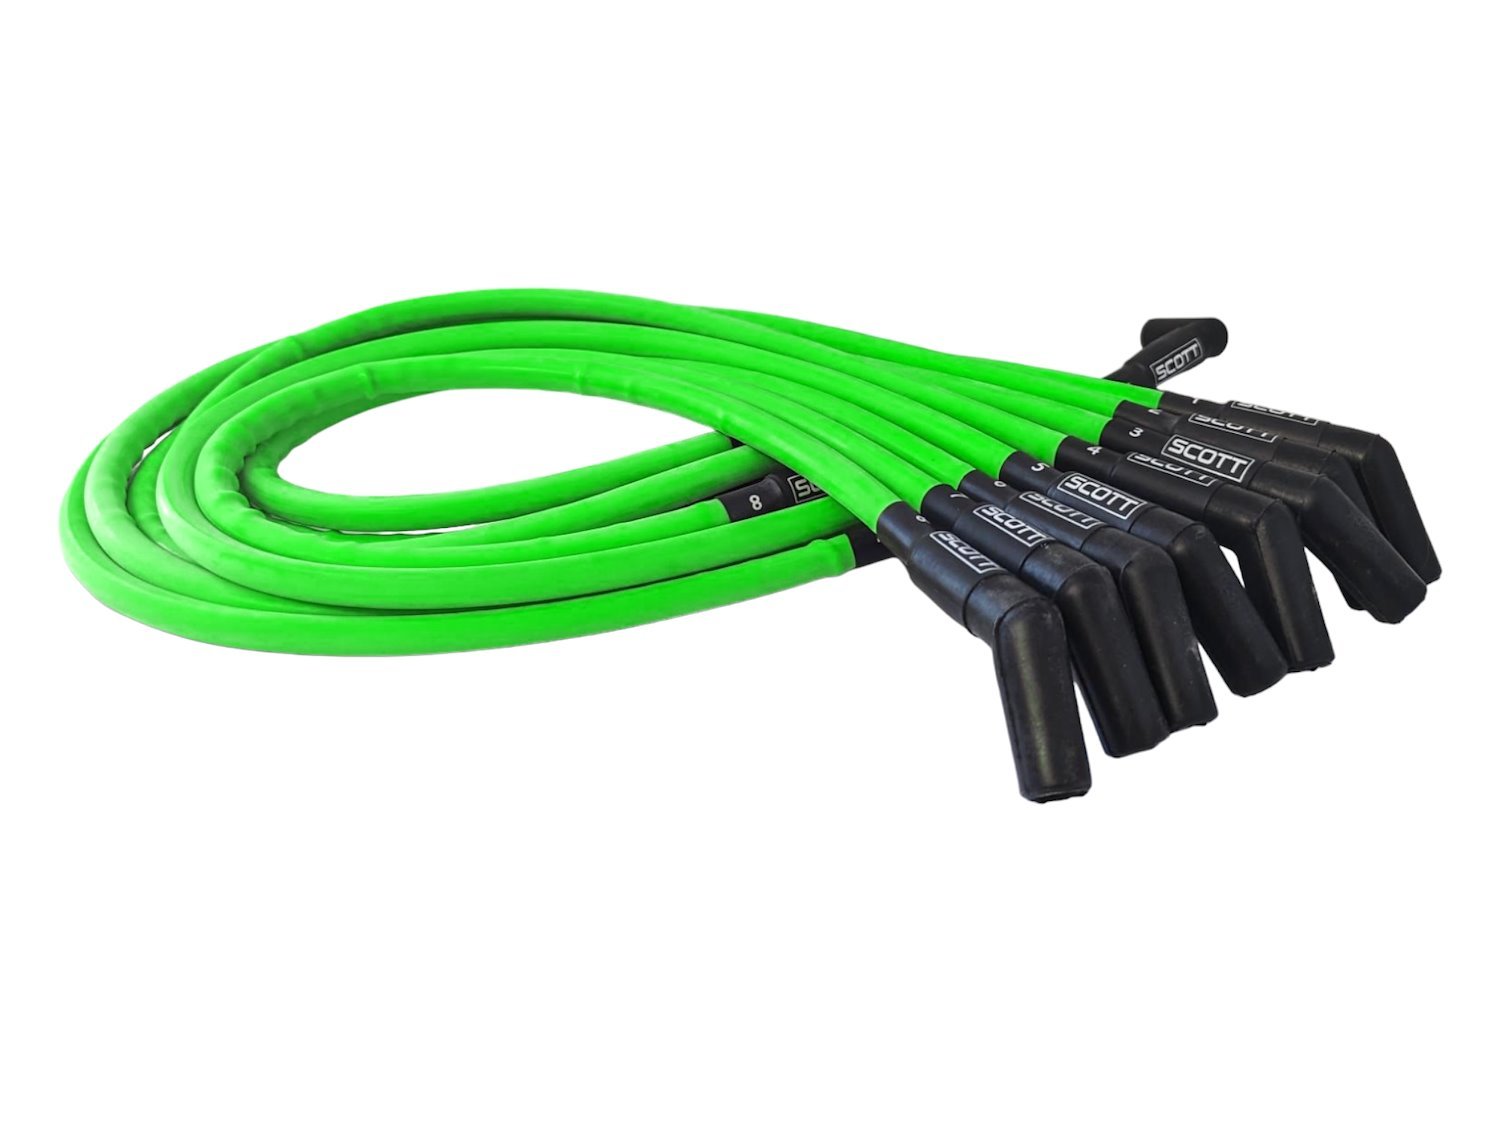 SPW-CH-426-8 High-Performance Silicone-Sleeved Spark Plug Wire Set for Small Block Ford, Over Valve Cover [Fluorescent Green]